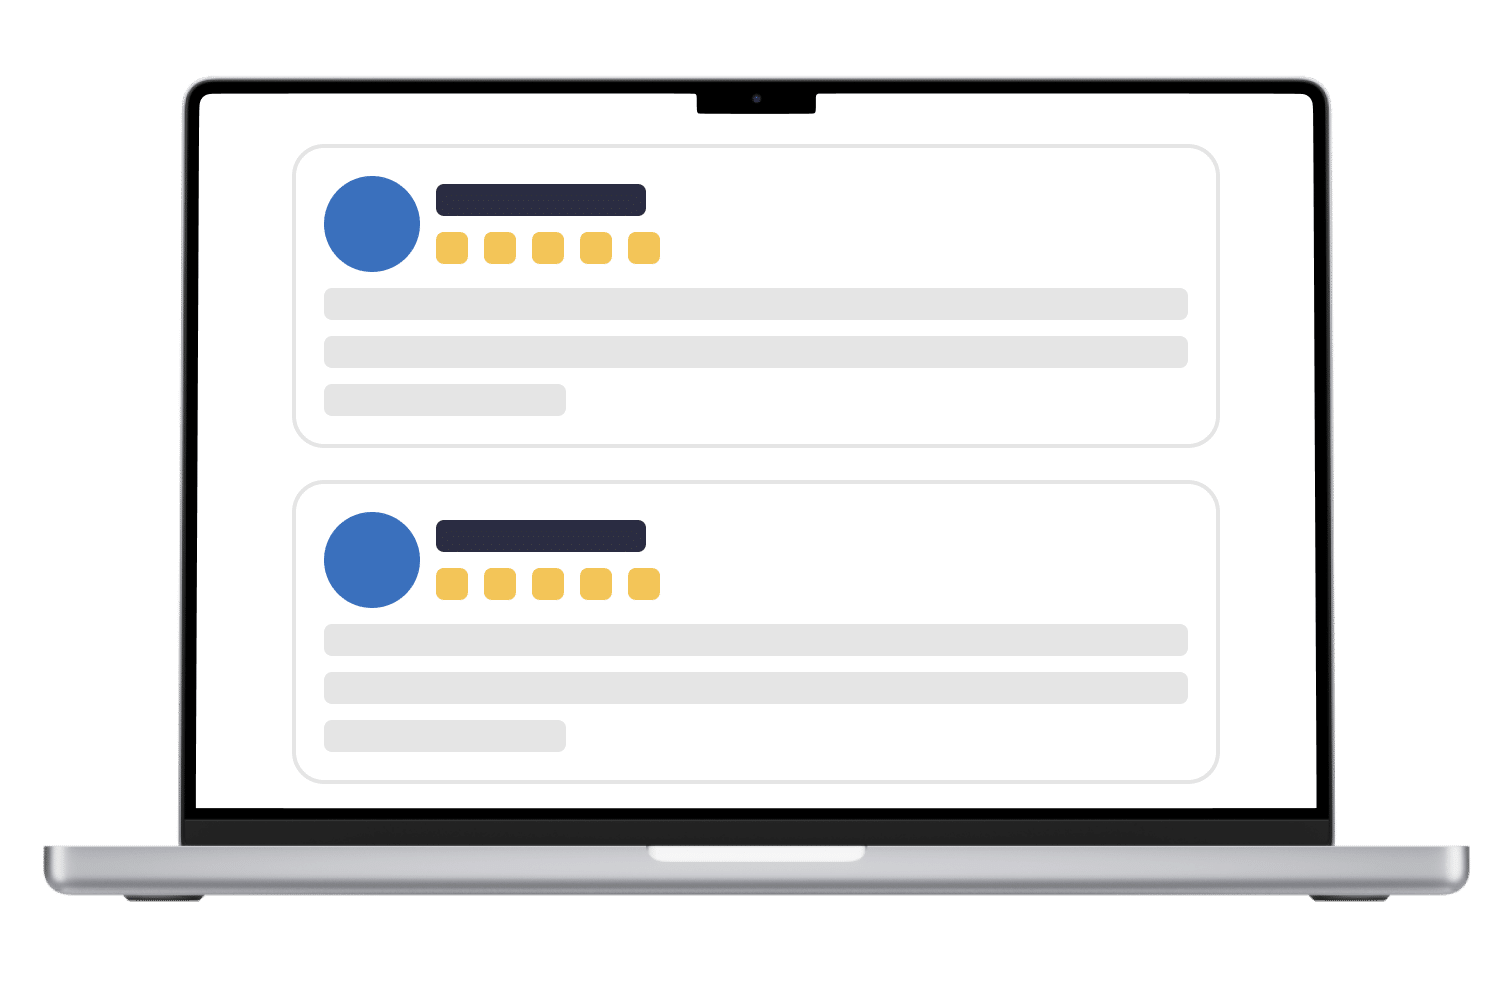 Negative feedback on the internet can greatly affect your company’s reputation, products, or services. Besides protecting your reputation, ORM also helps active index URLs represent your brand in the best form.